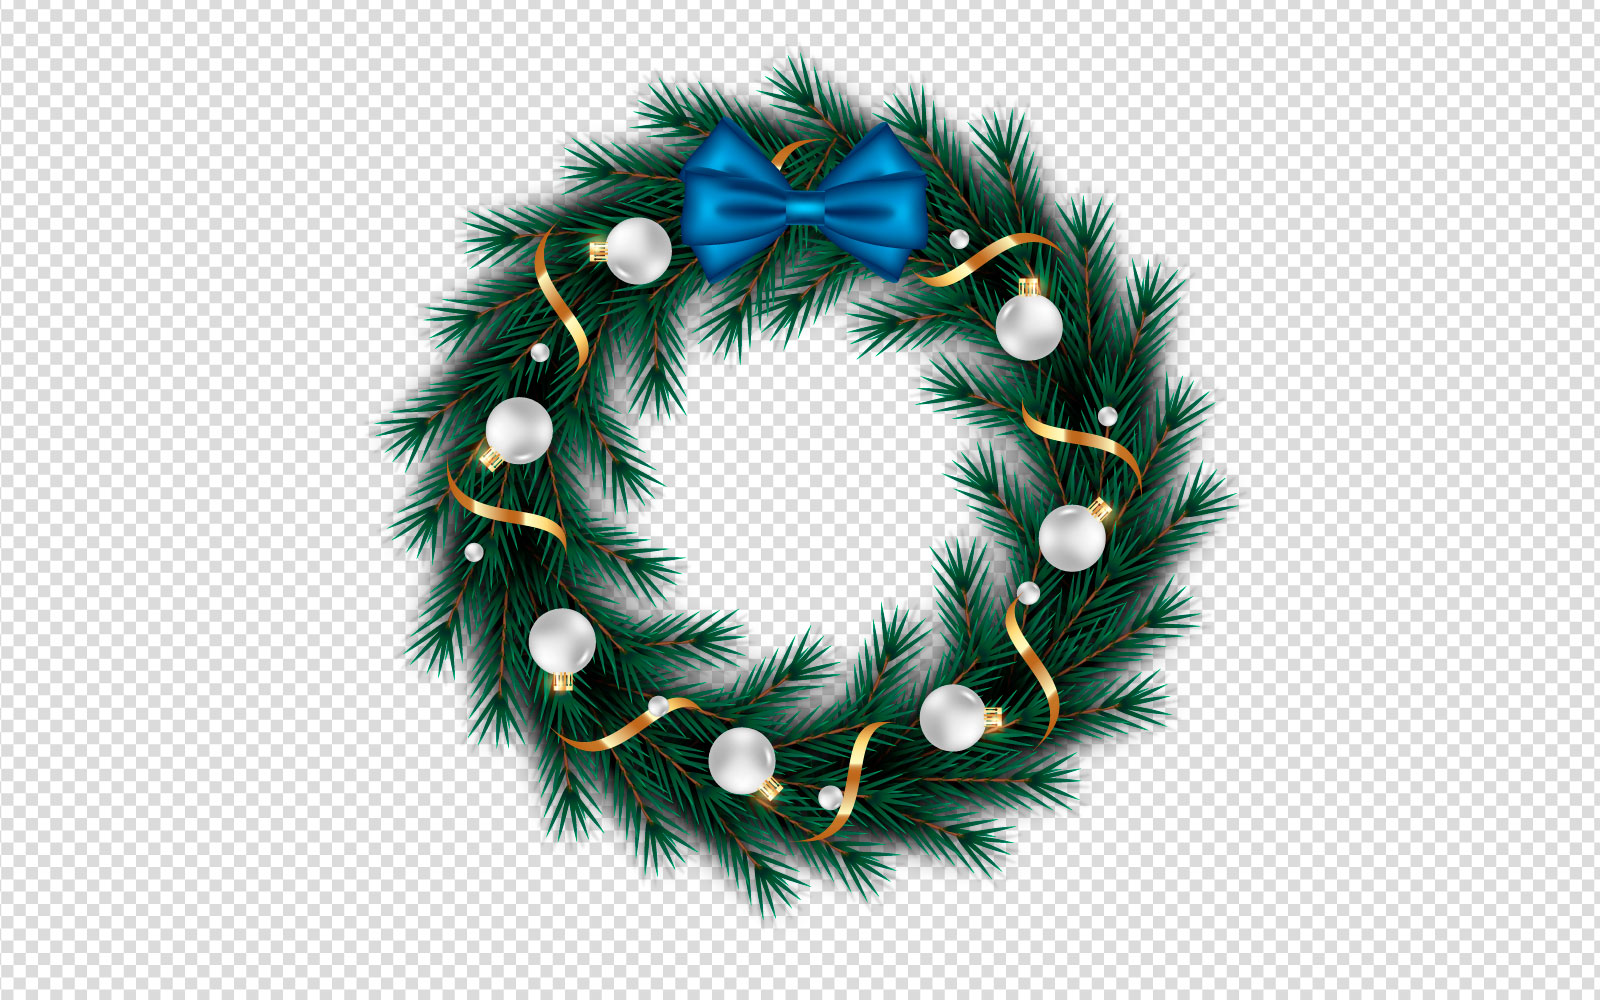 Christmas Wreath Decoration With Pine Branch Christmas Ball And Blue Ribbon